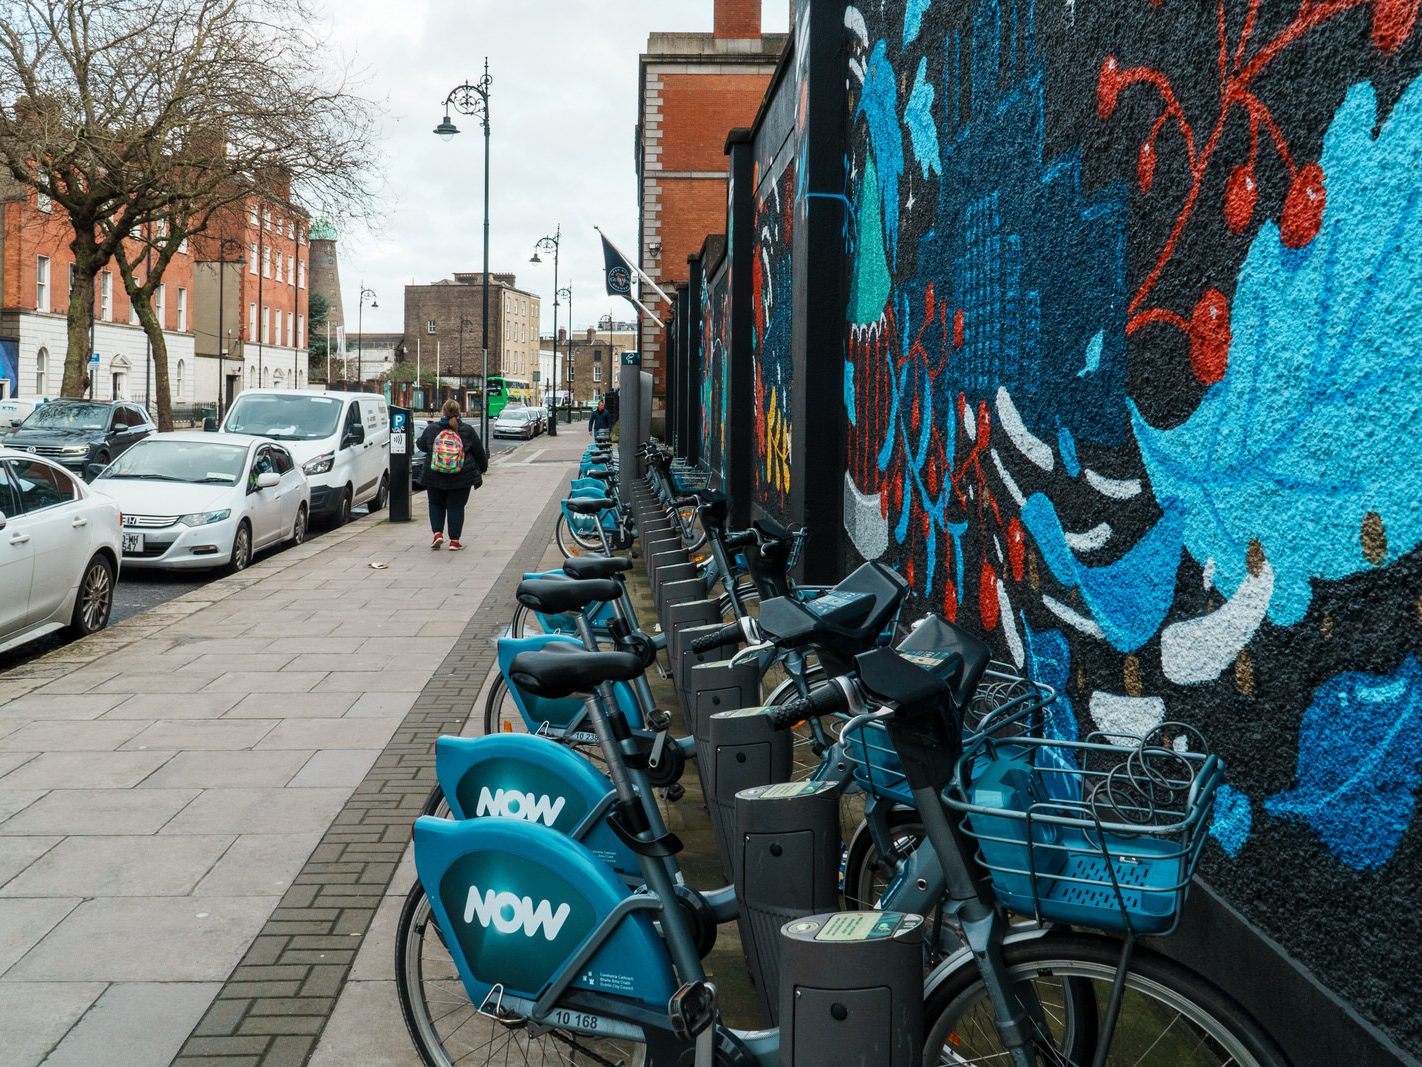 TWO FOR THE PRICE OF ONE [DUBLINBIKES DOCKING STATION 75 AND A MURAL BY HOLLY PEREIRA]-229687-1